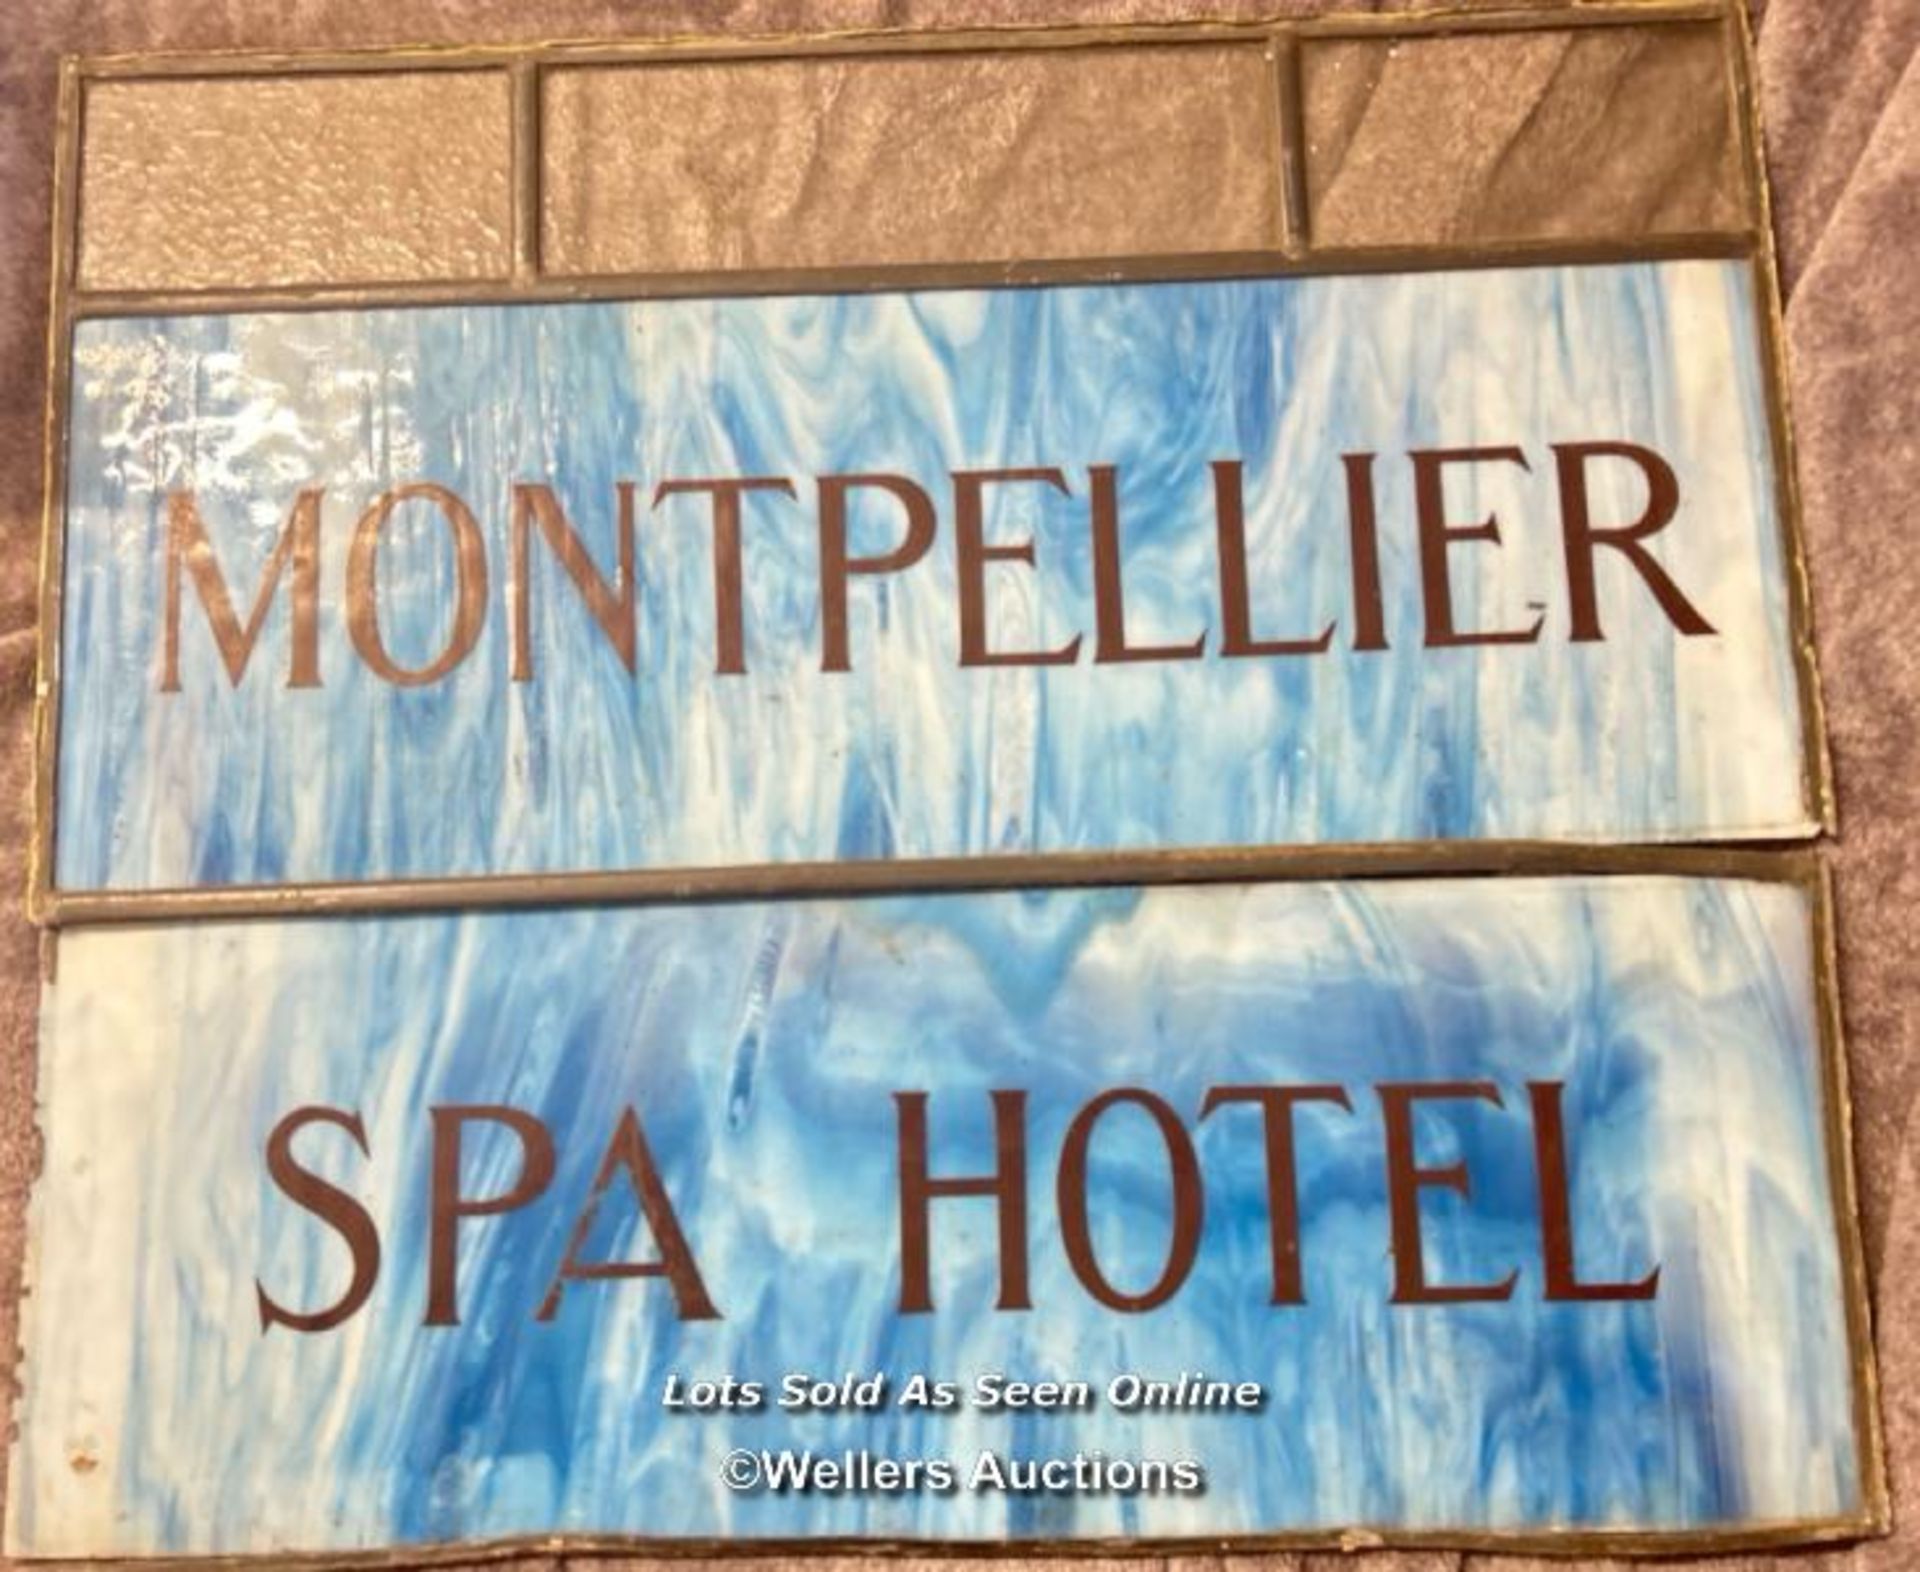 Montpellier Spa Hotel blue glass and lead entrance sign, 66 x 56cm / AN35